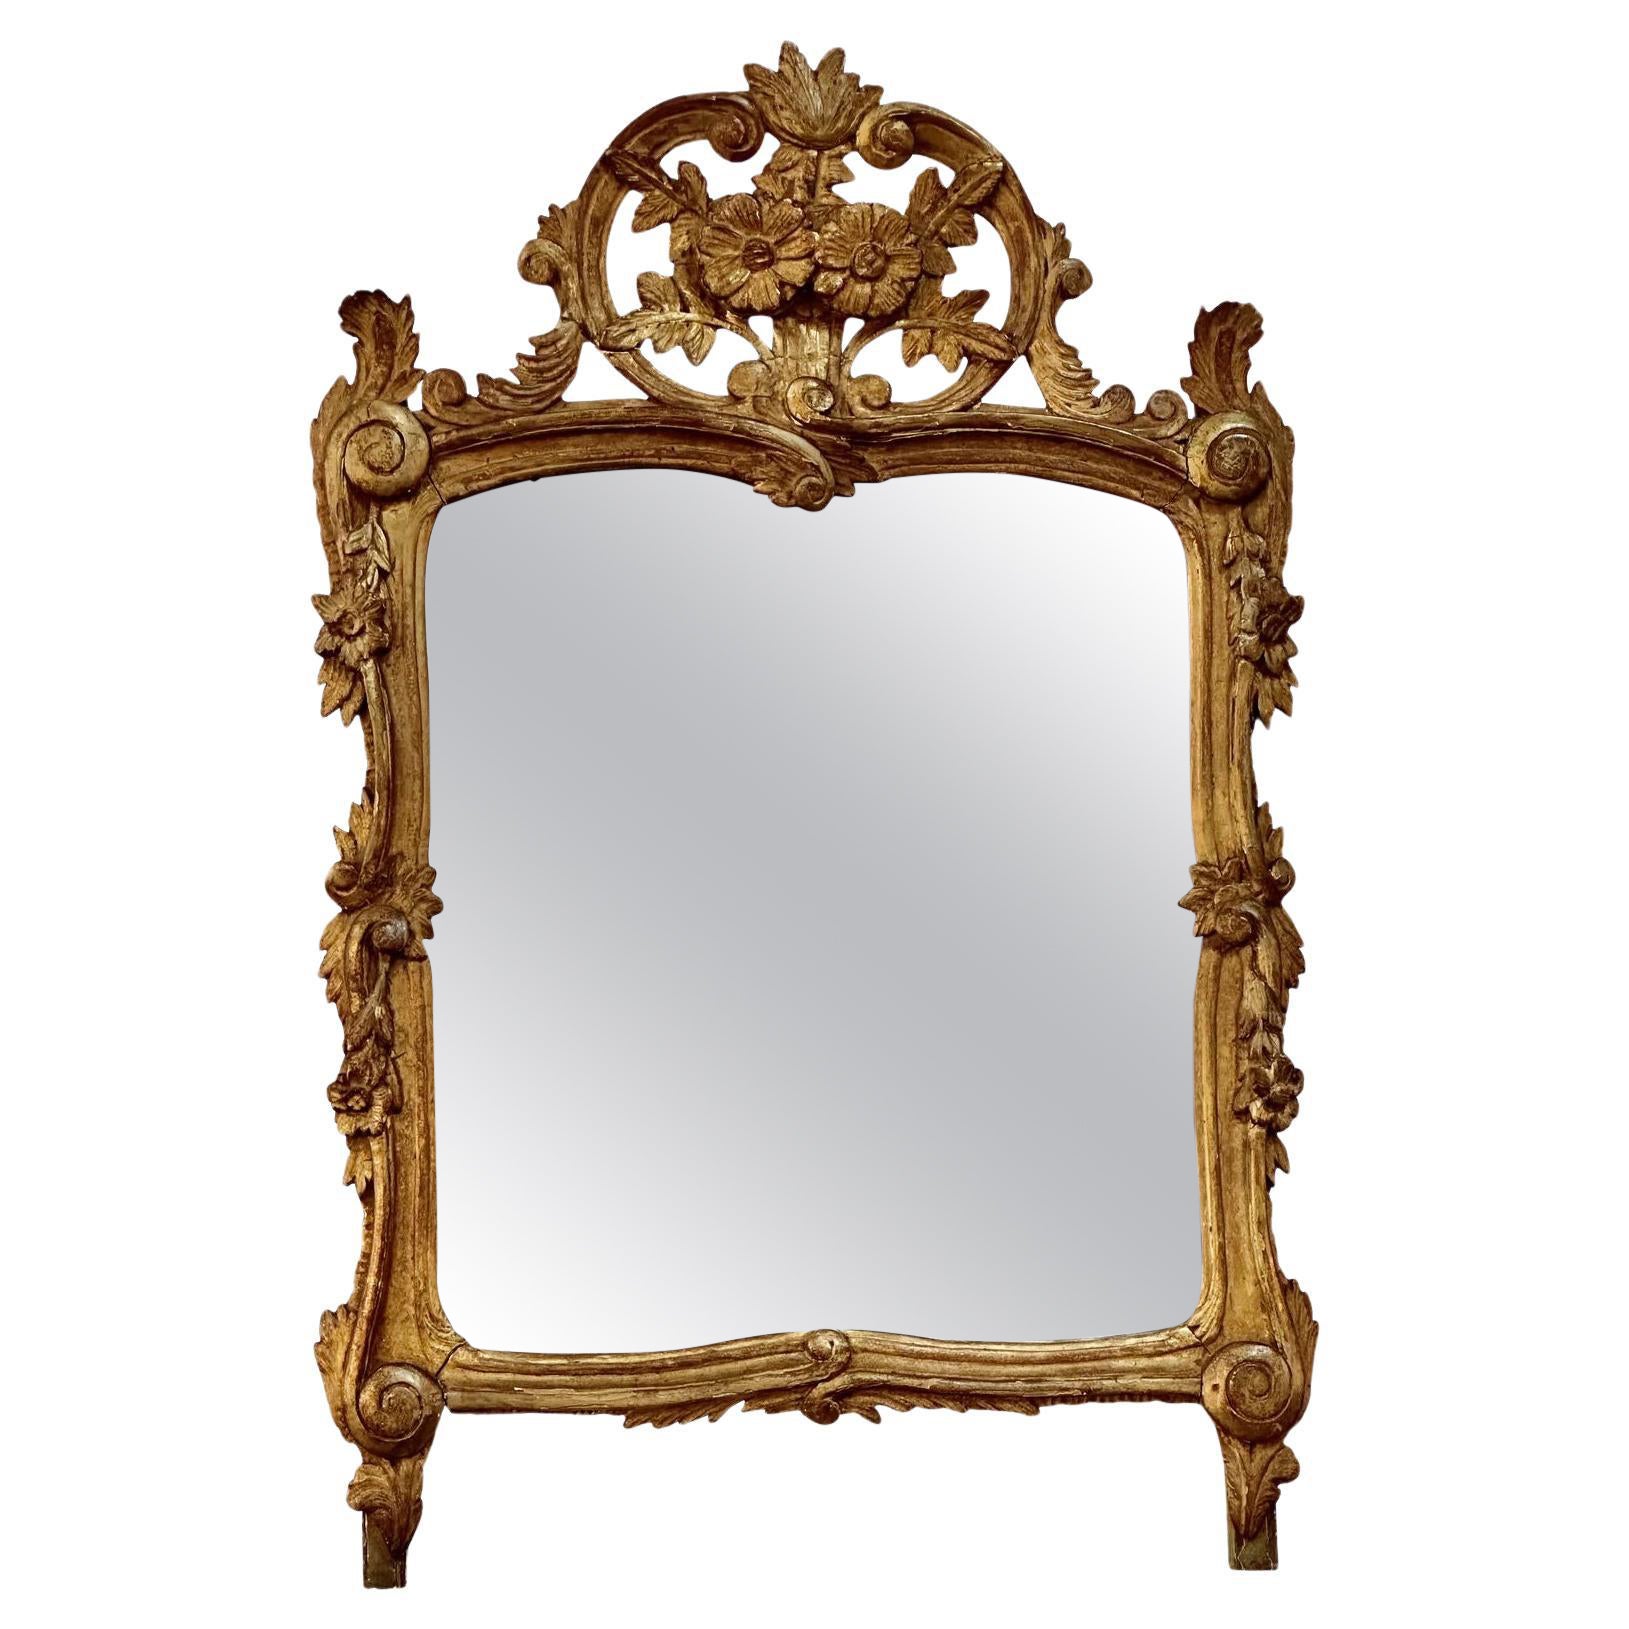 French Provincial Mirror with Floral and Foliate Carvings